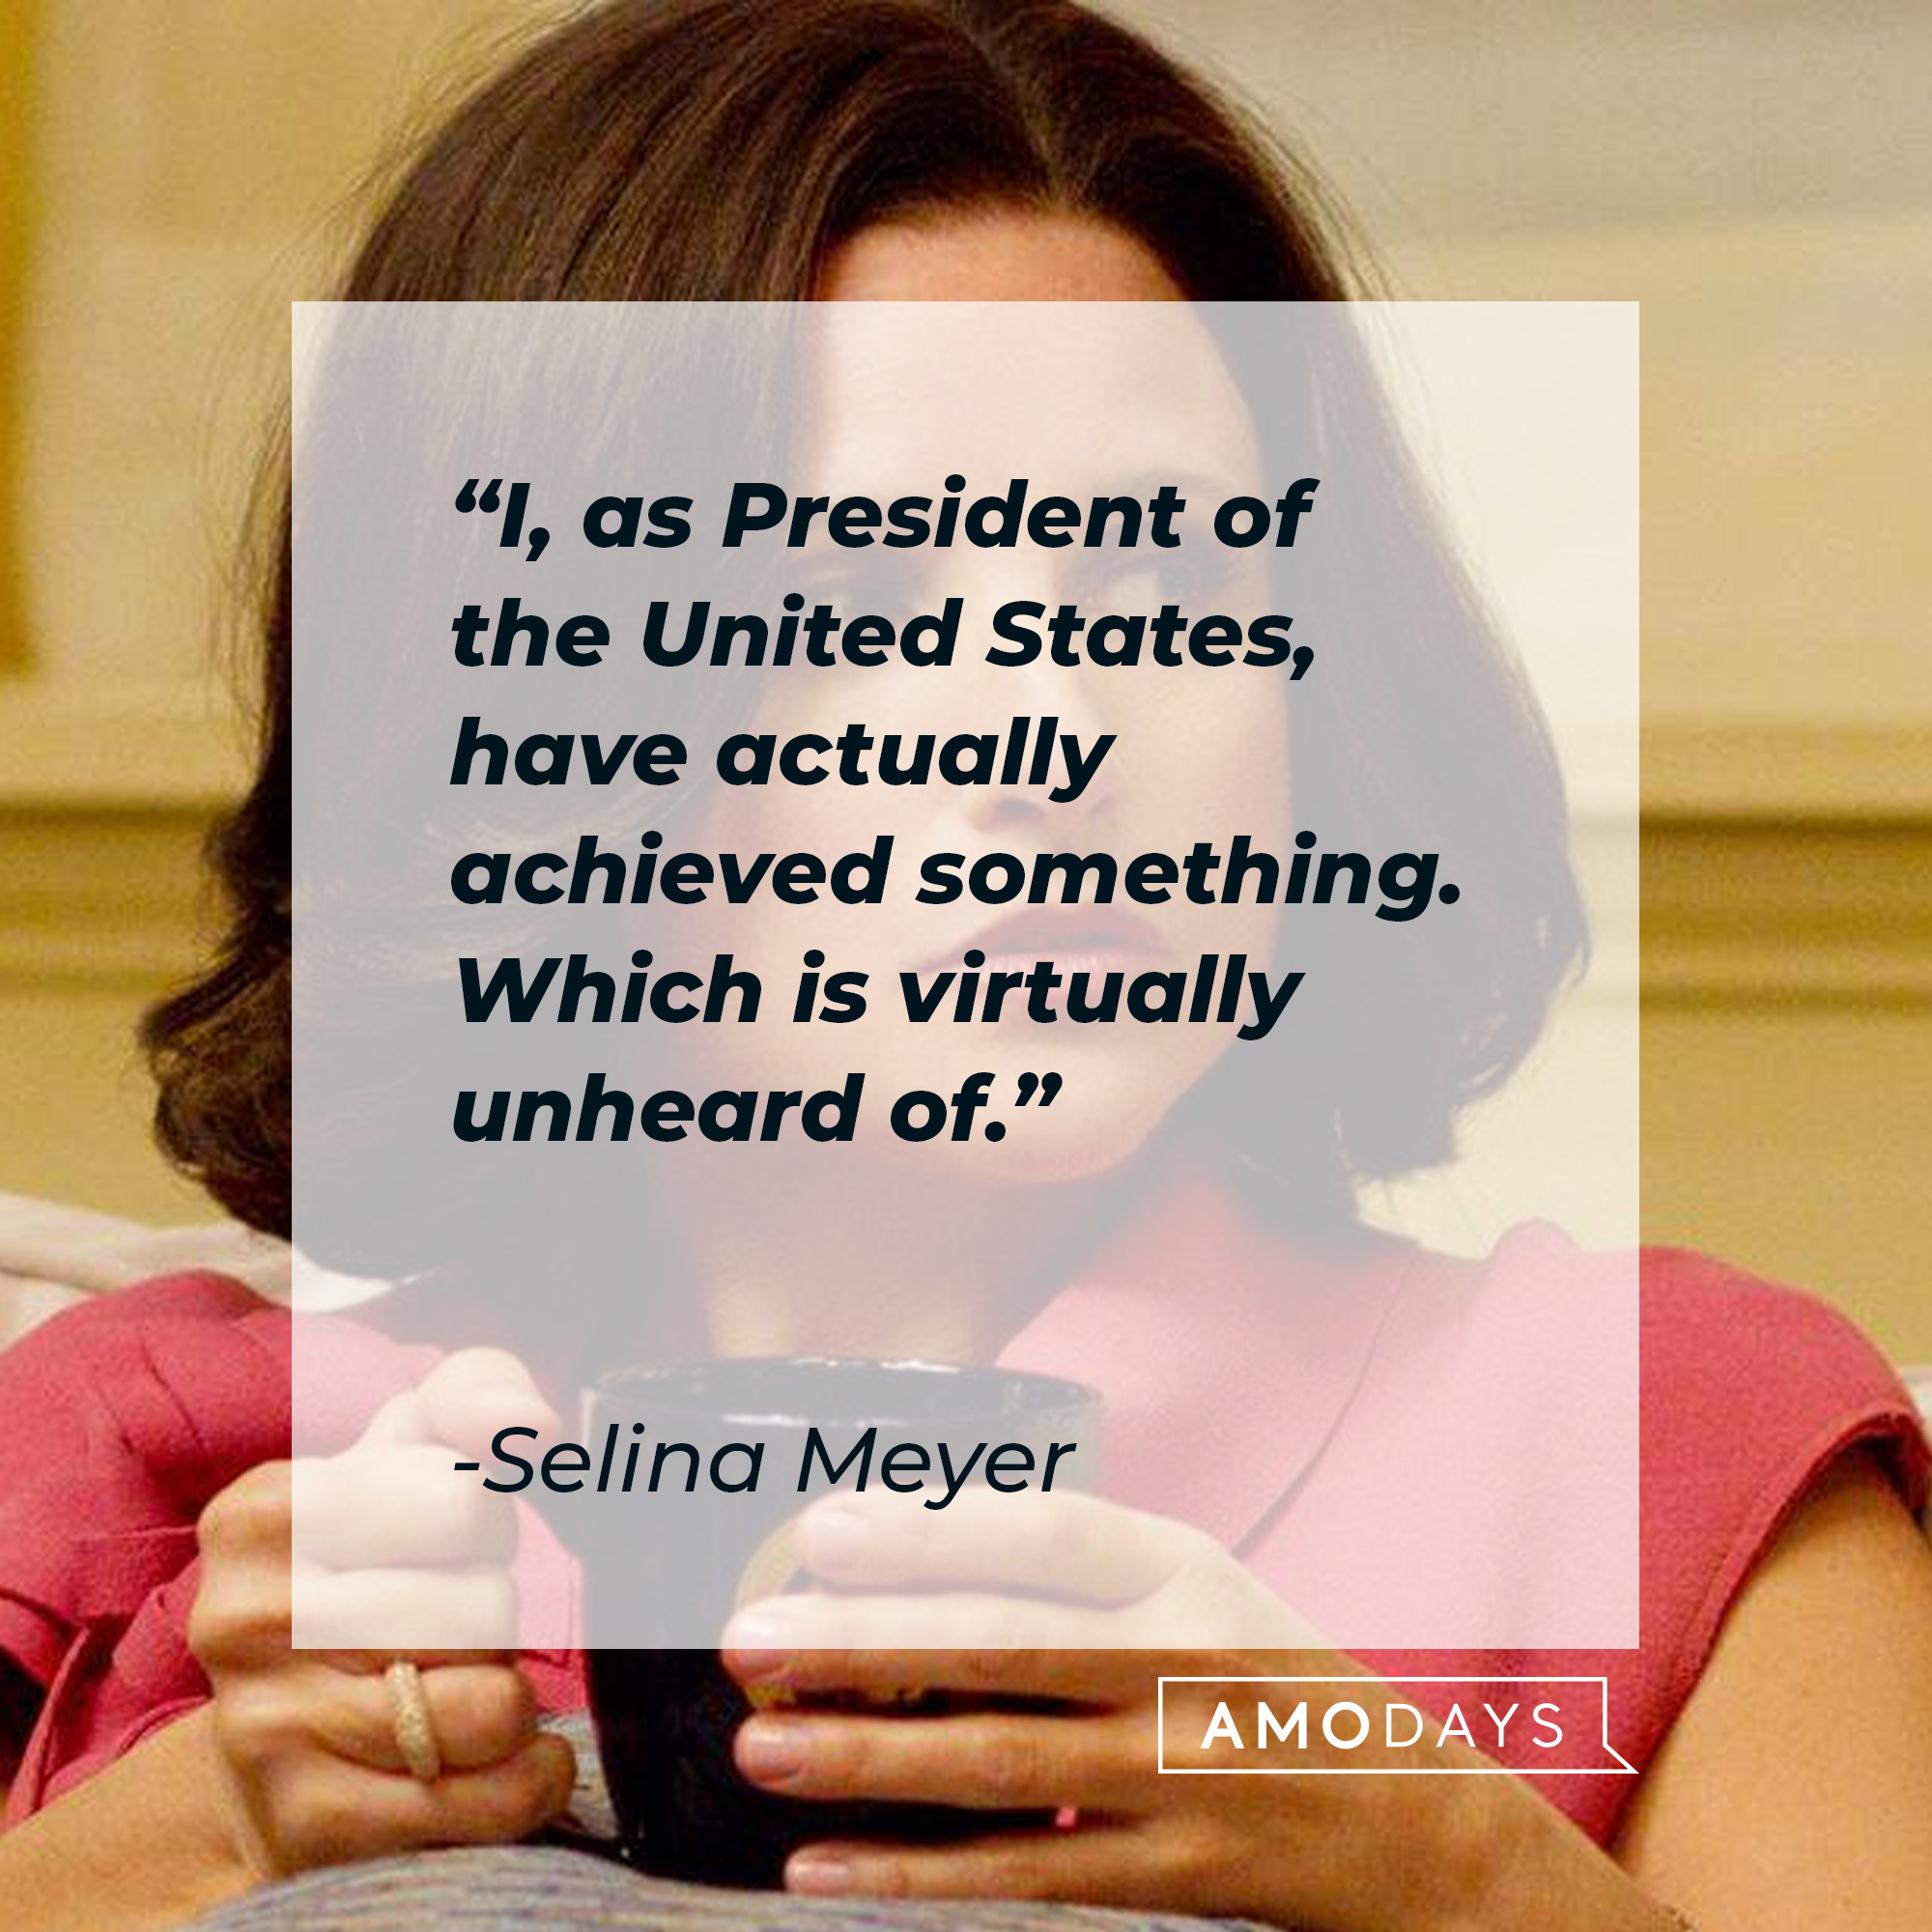 Selina Meyer, with her quote: "I, as President of the United States, have actually achieved something. Which is virtually unheard of." | Source: Facebook.com/veep